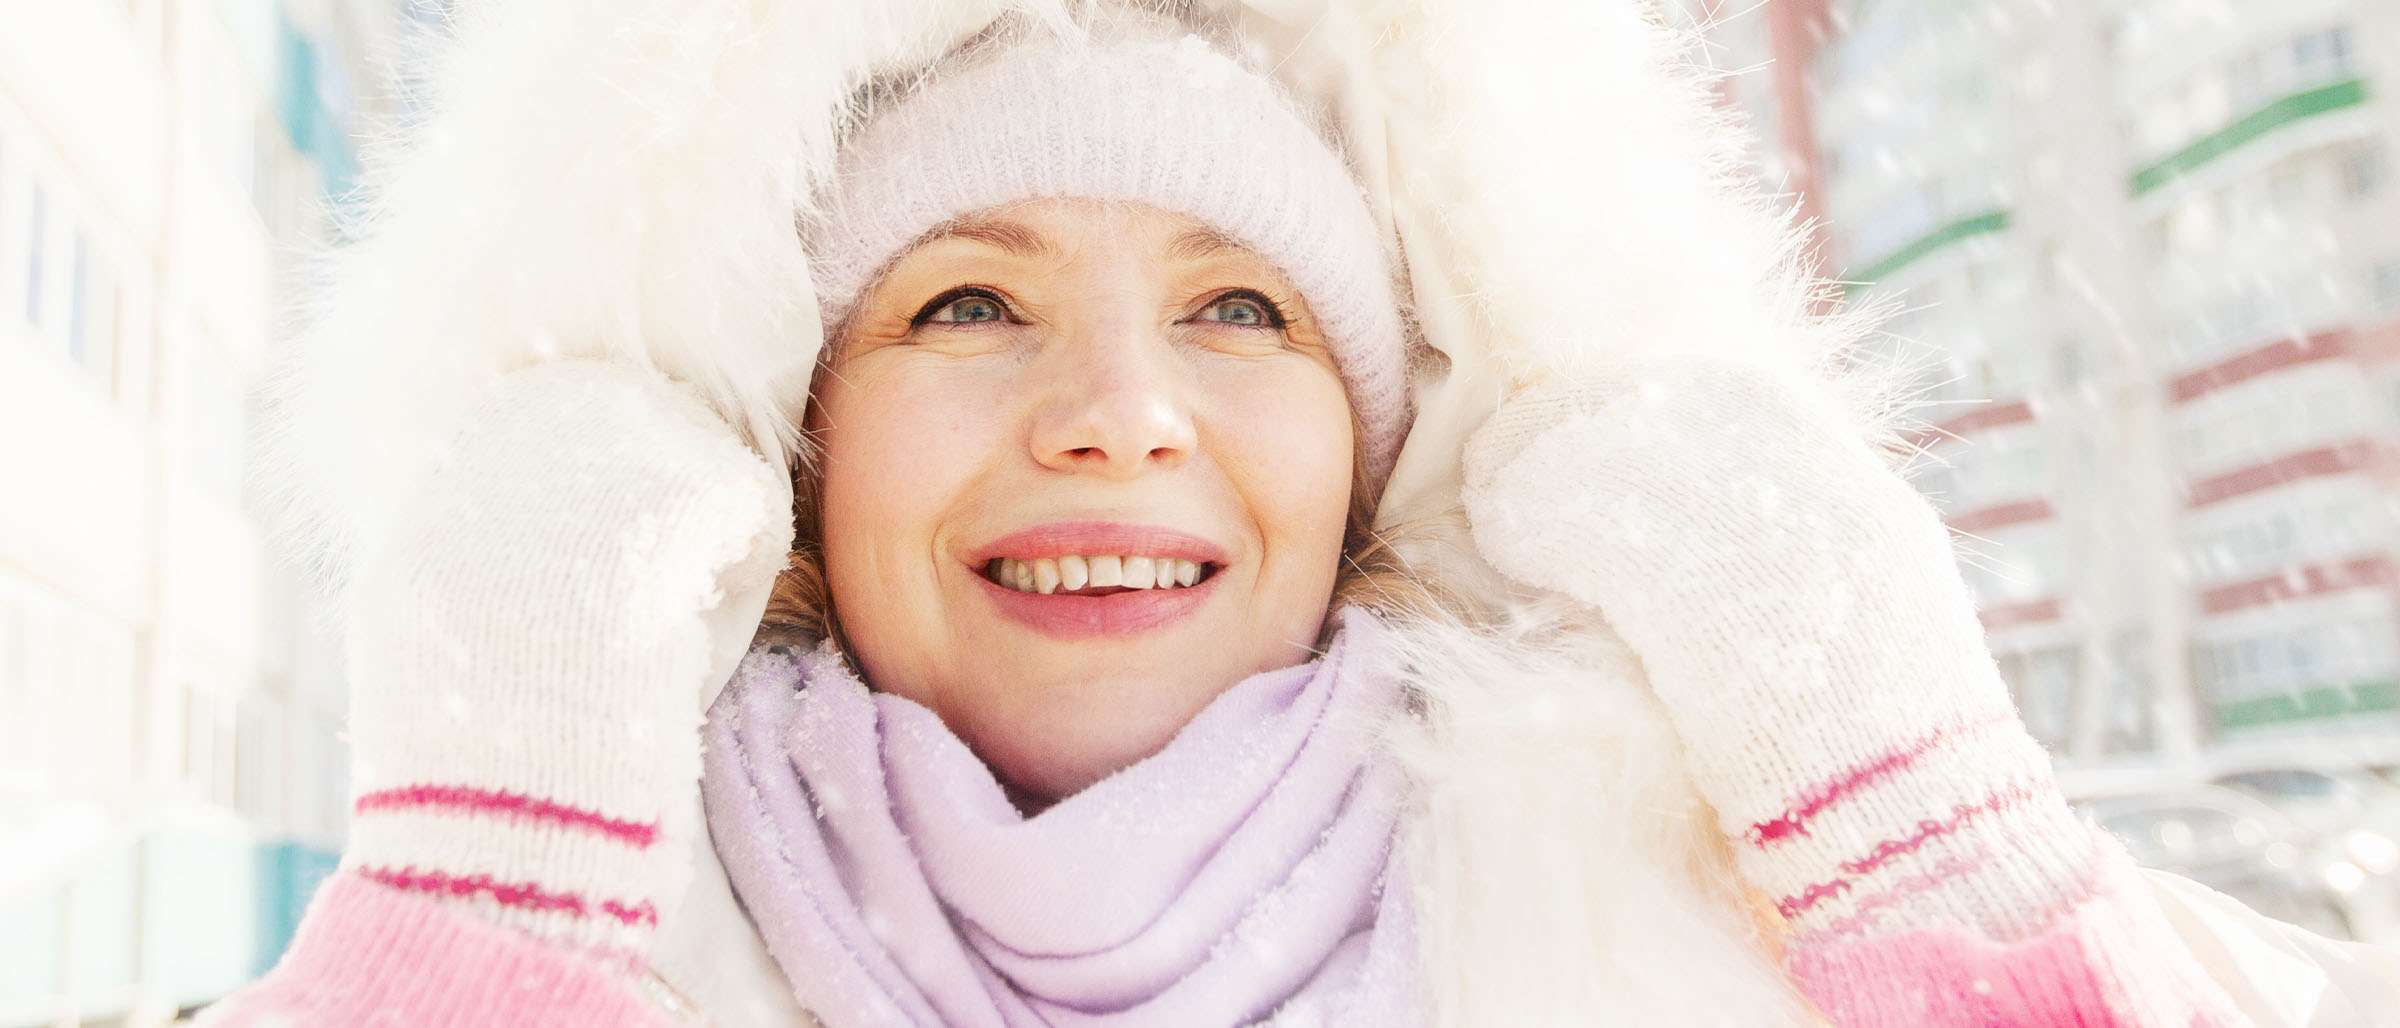 5 Tips to Fight Dry Skin During Winter